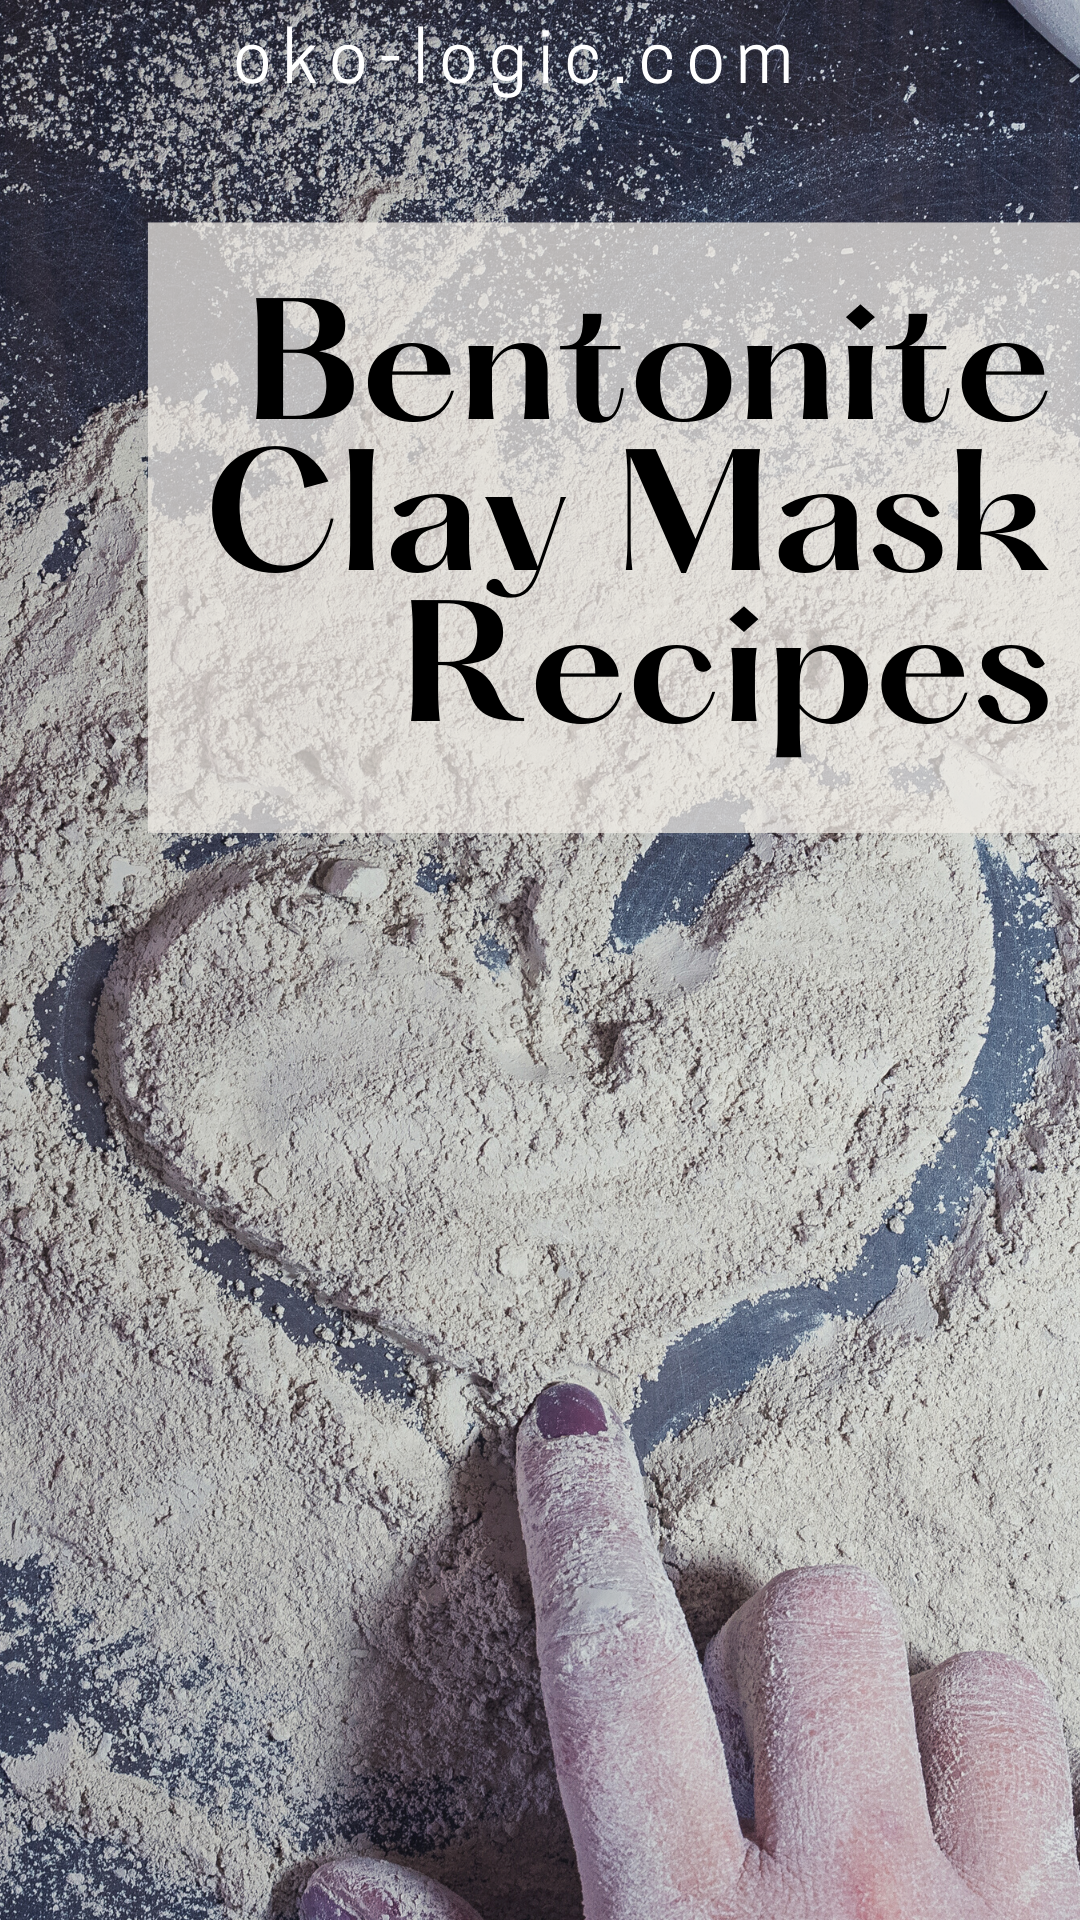 Looking for an Easy Bentonite Clay Mask Recipe? You found it!￼